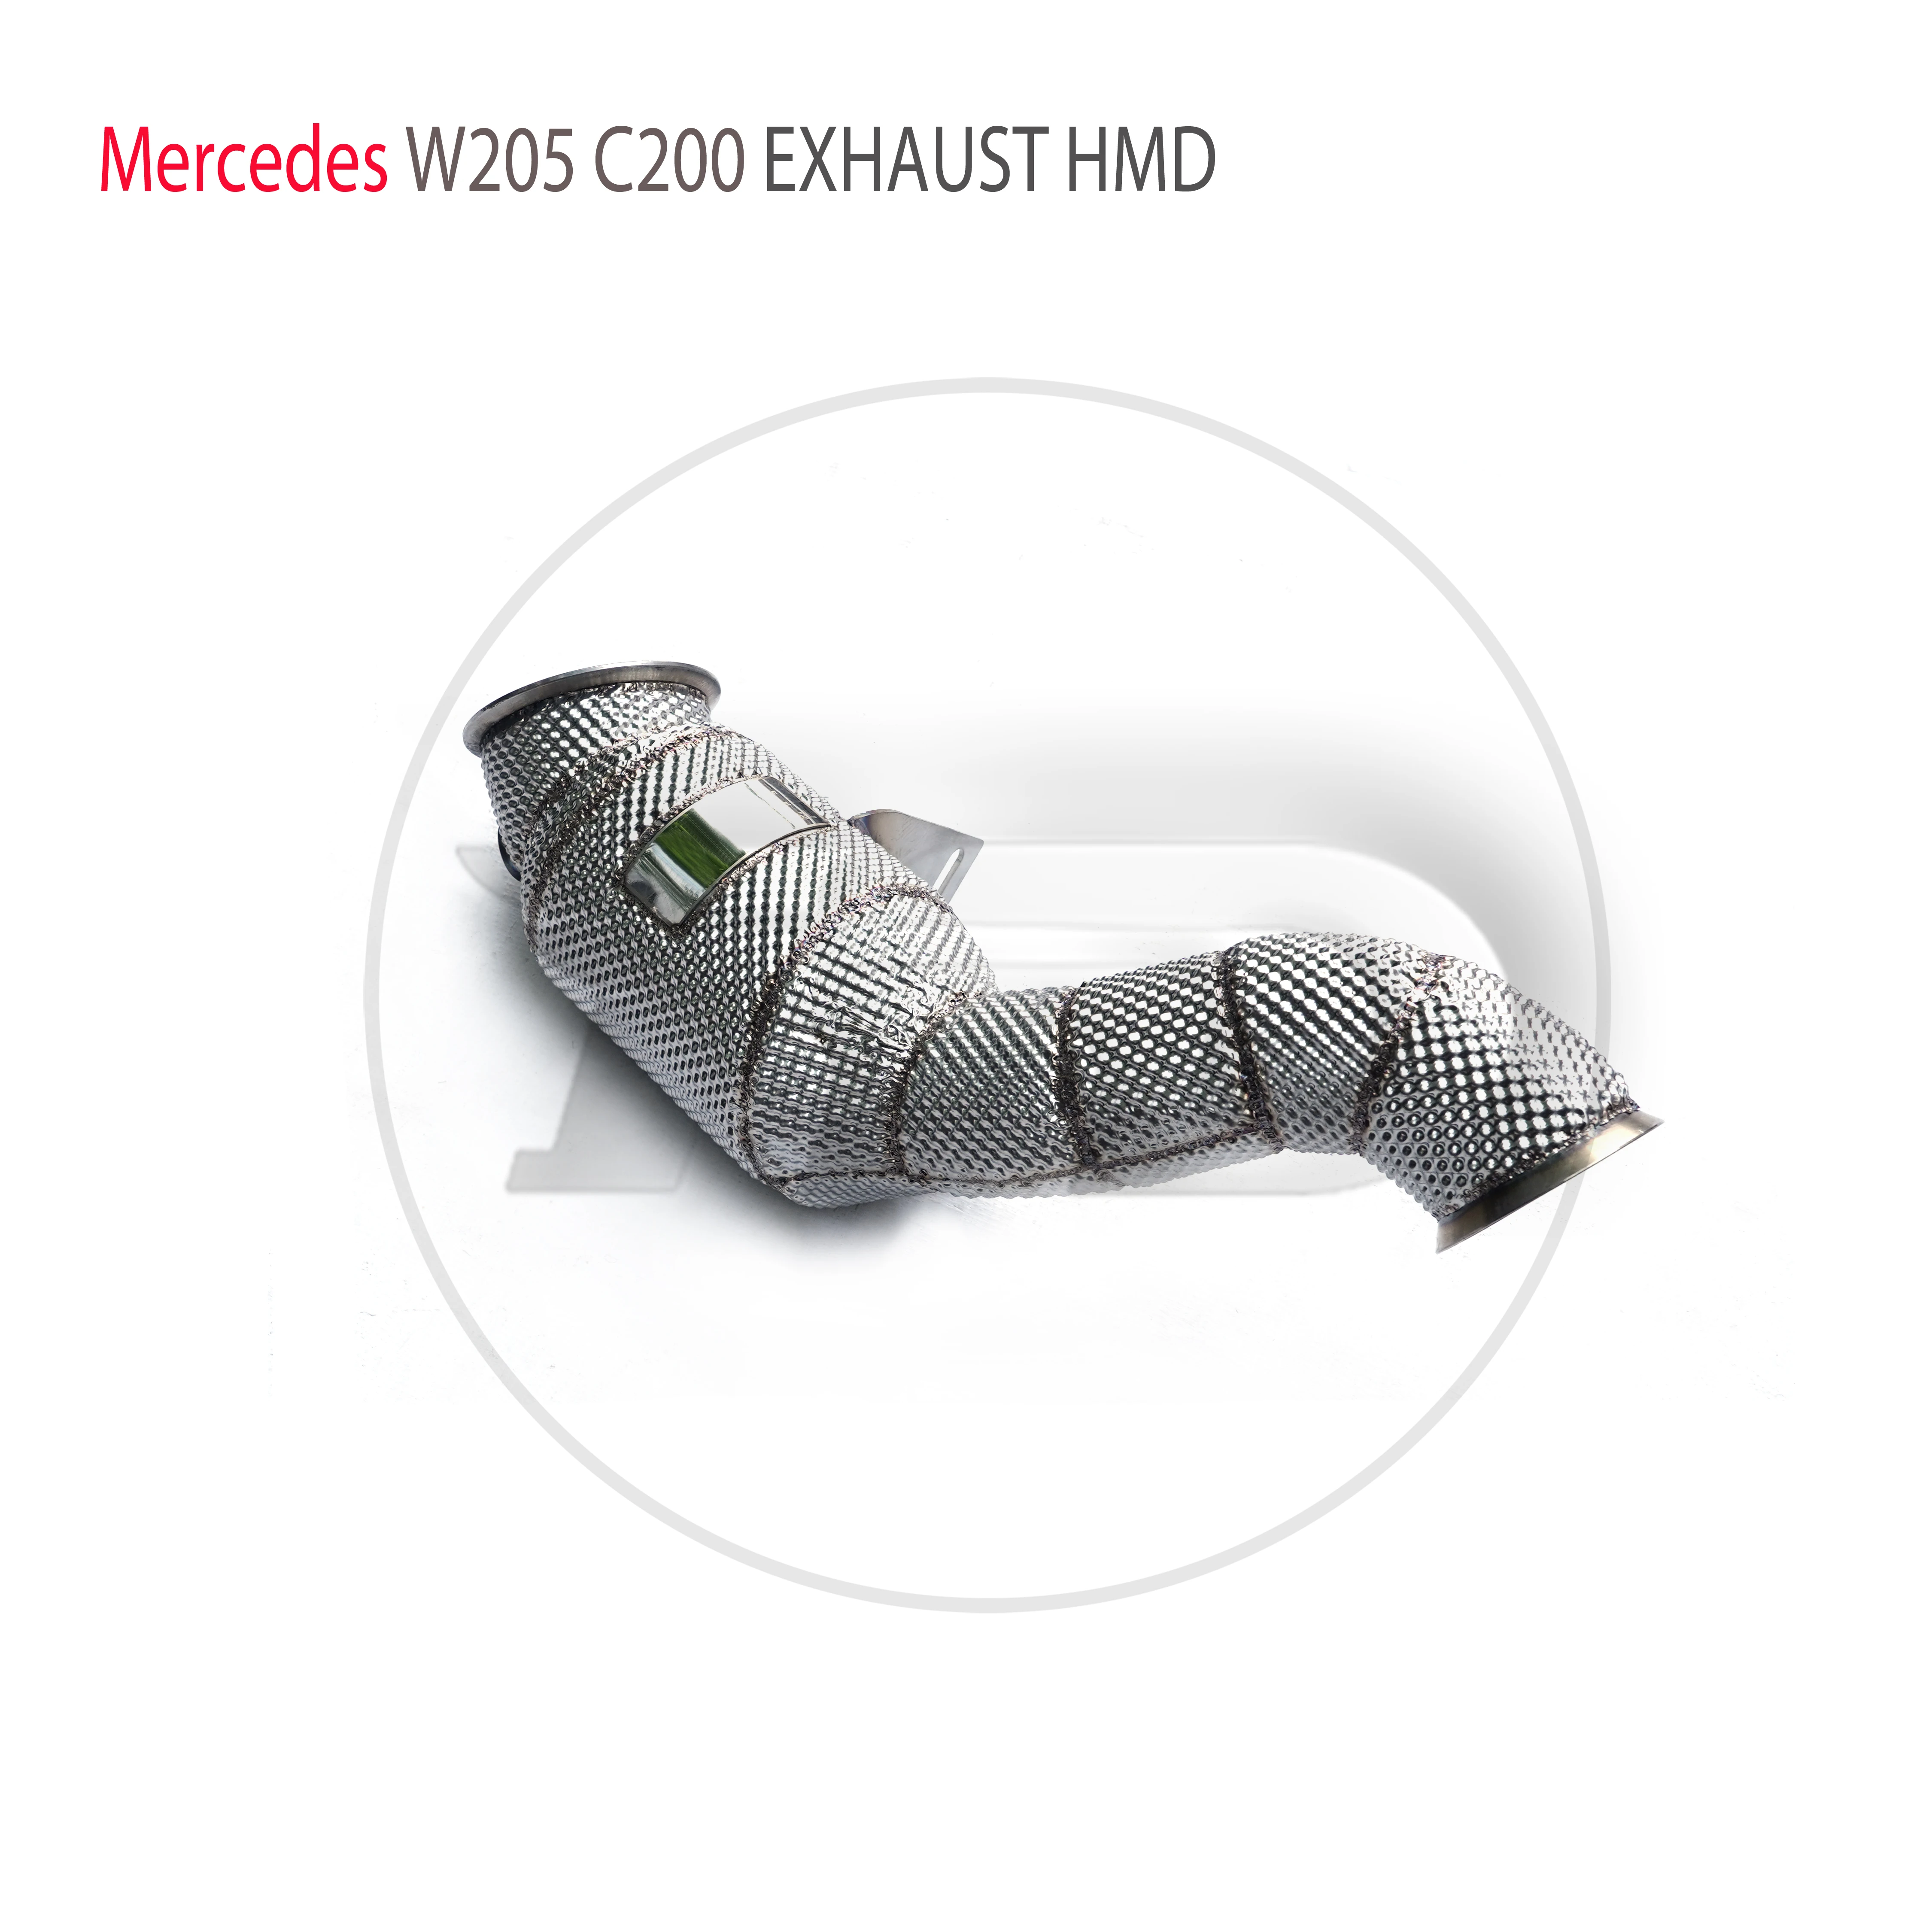 

HMD Exhaust System High Flow Performance Downpipe for Mercedes Benz S205 C205 C200 M274 M264 1.5T 2.0T Left-hand Drive Car